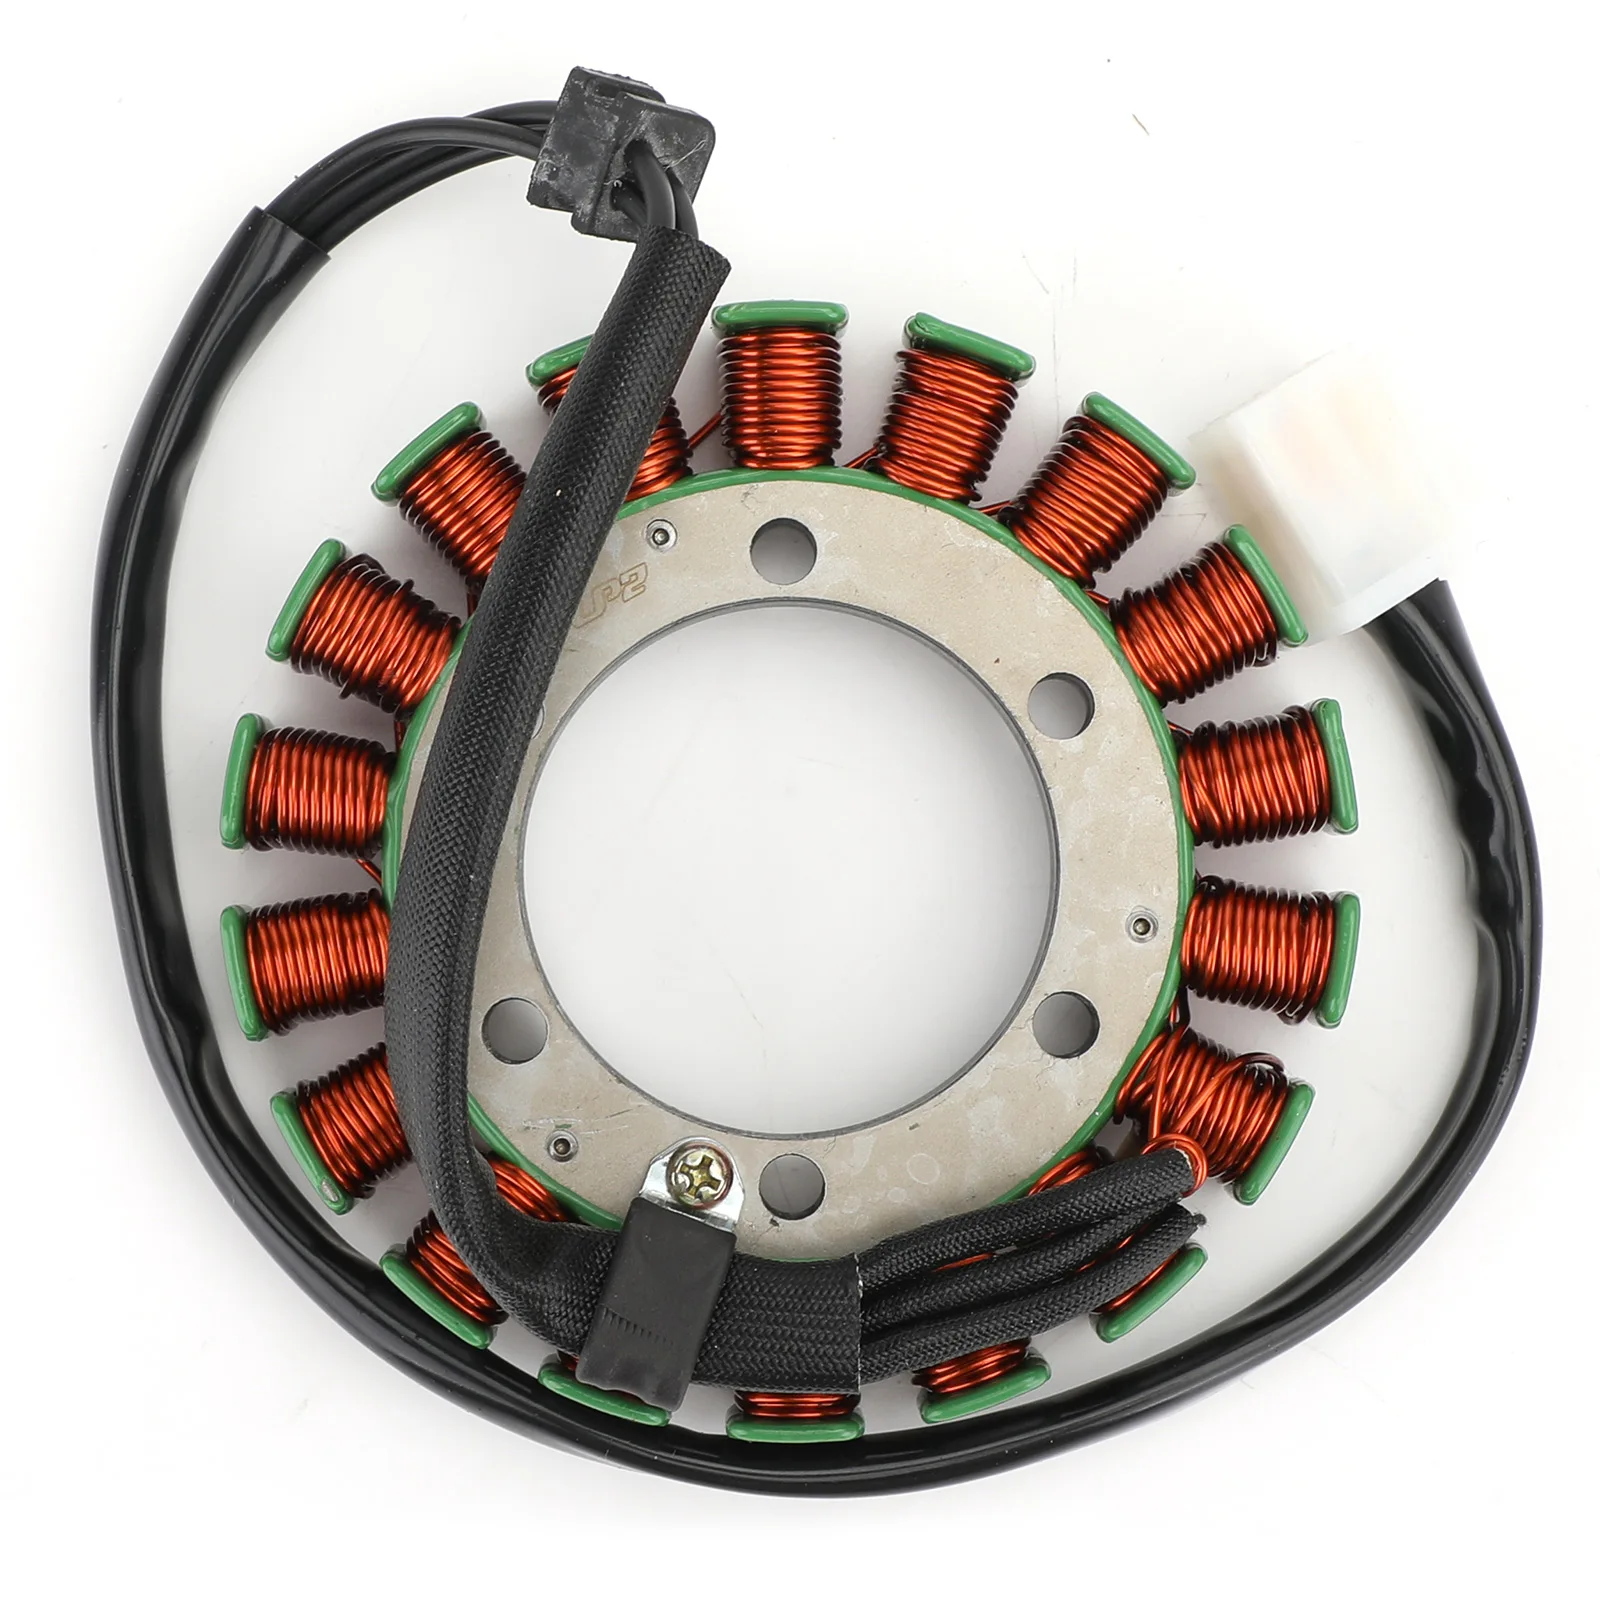 Areyourshop For Triumph Daytona 600 650 Speed Four 600 TT600 2003-2005 Generator Magneto Stator Coil Motorcycle Accessories